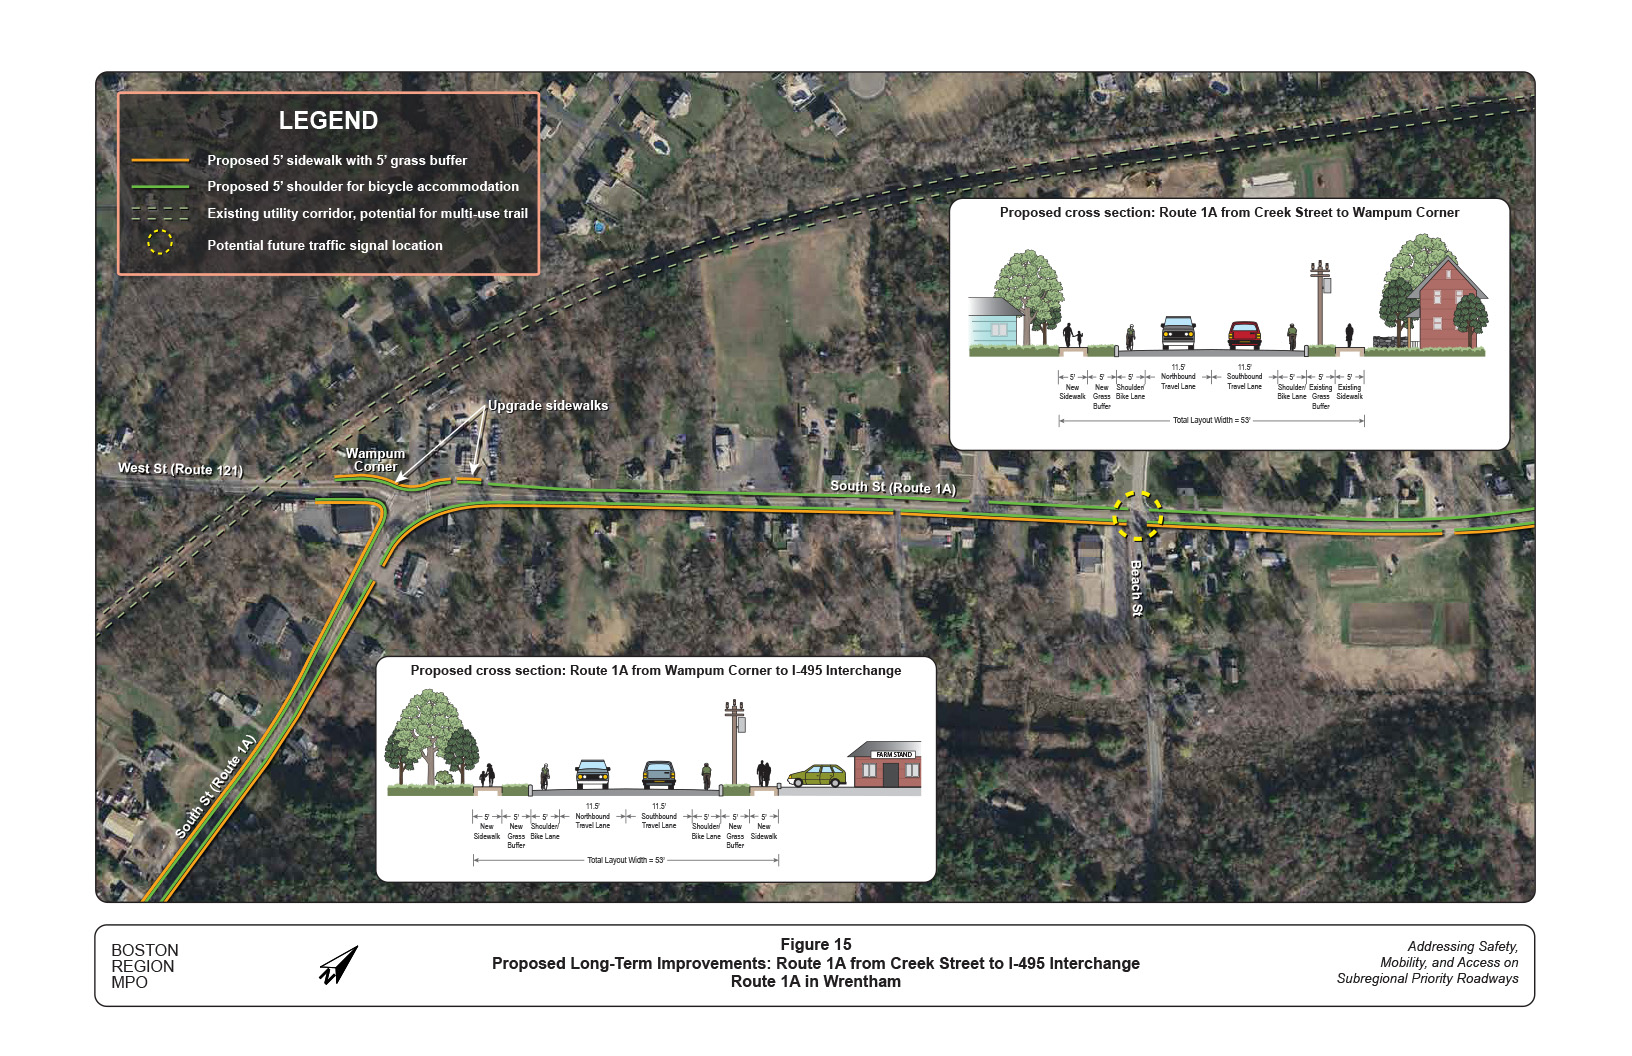 Figure 15 is a map that illustrates the proposed long-term improvements to sections of Route 1A between Creek Street and the Interstate 495 interchange. Two insets contain an illustration of the proposed roadway cross sections.